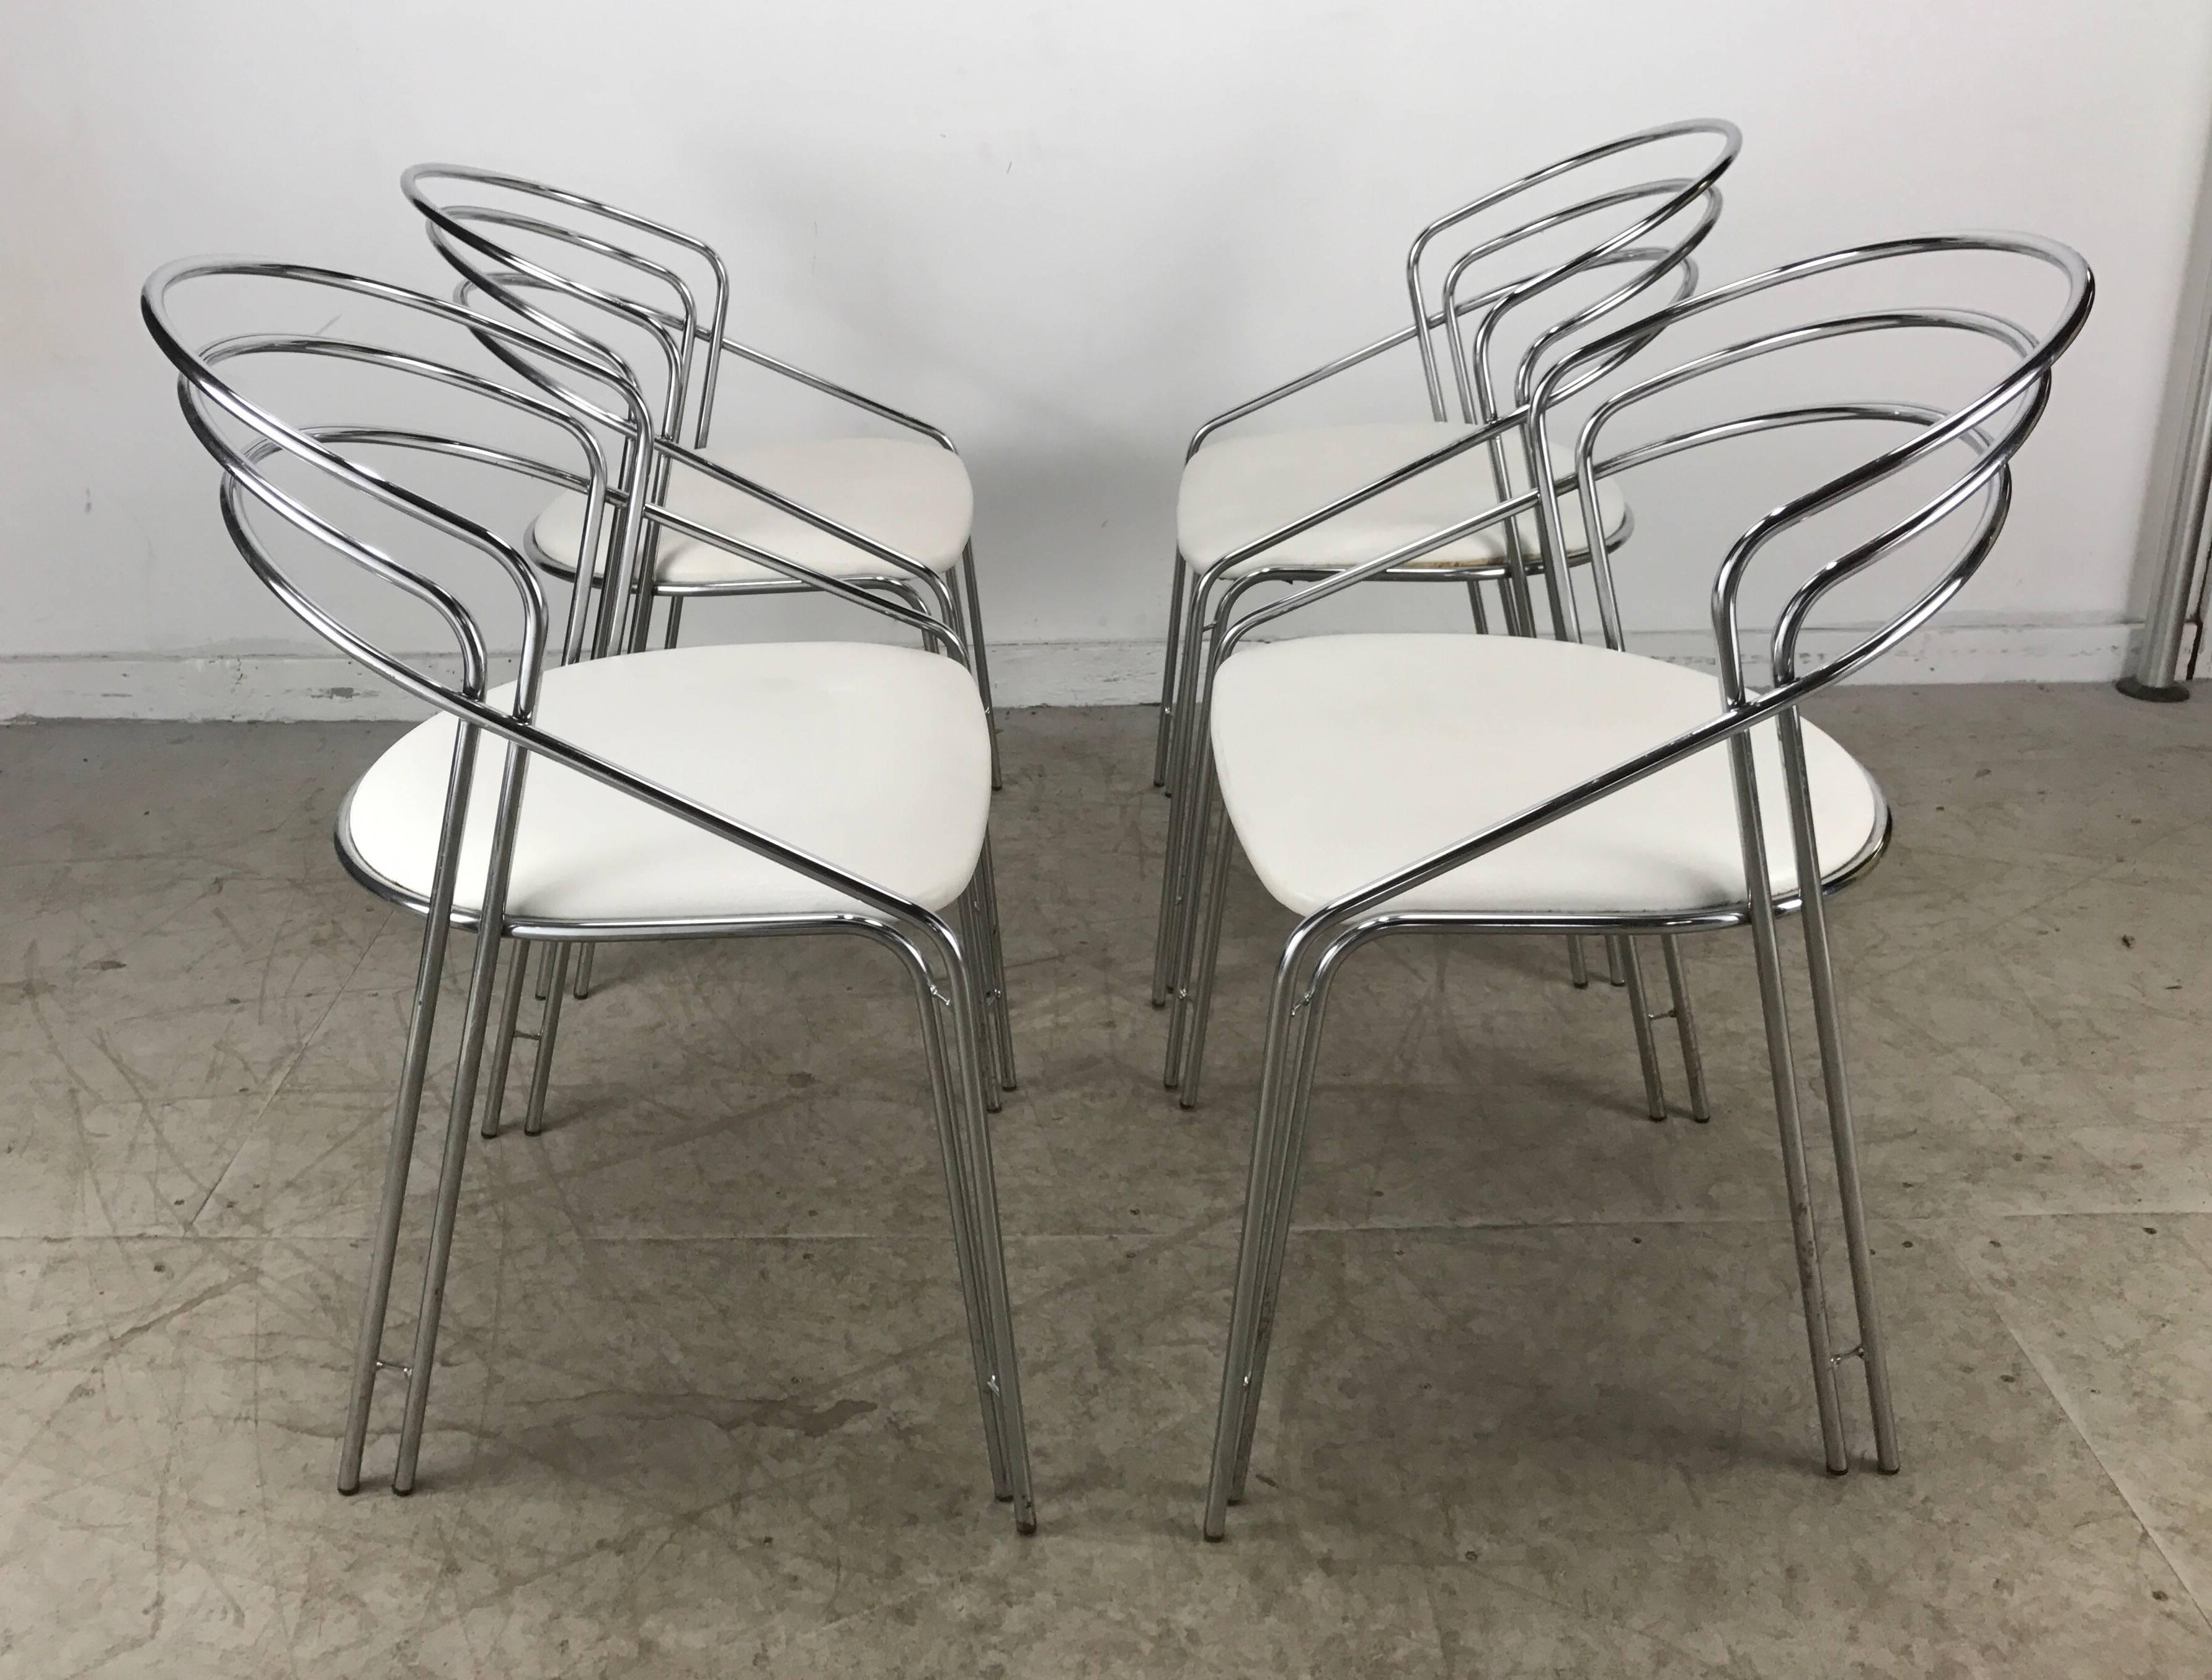 Naugahyde Set of Four Postmodern Chrome /White Italian Arm /Dining Chairs, Made in Italy